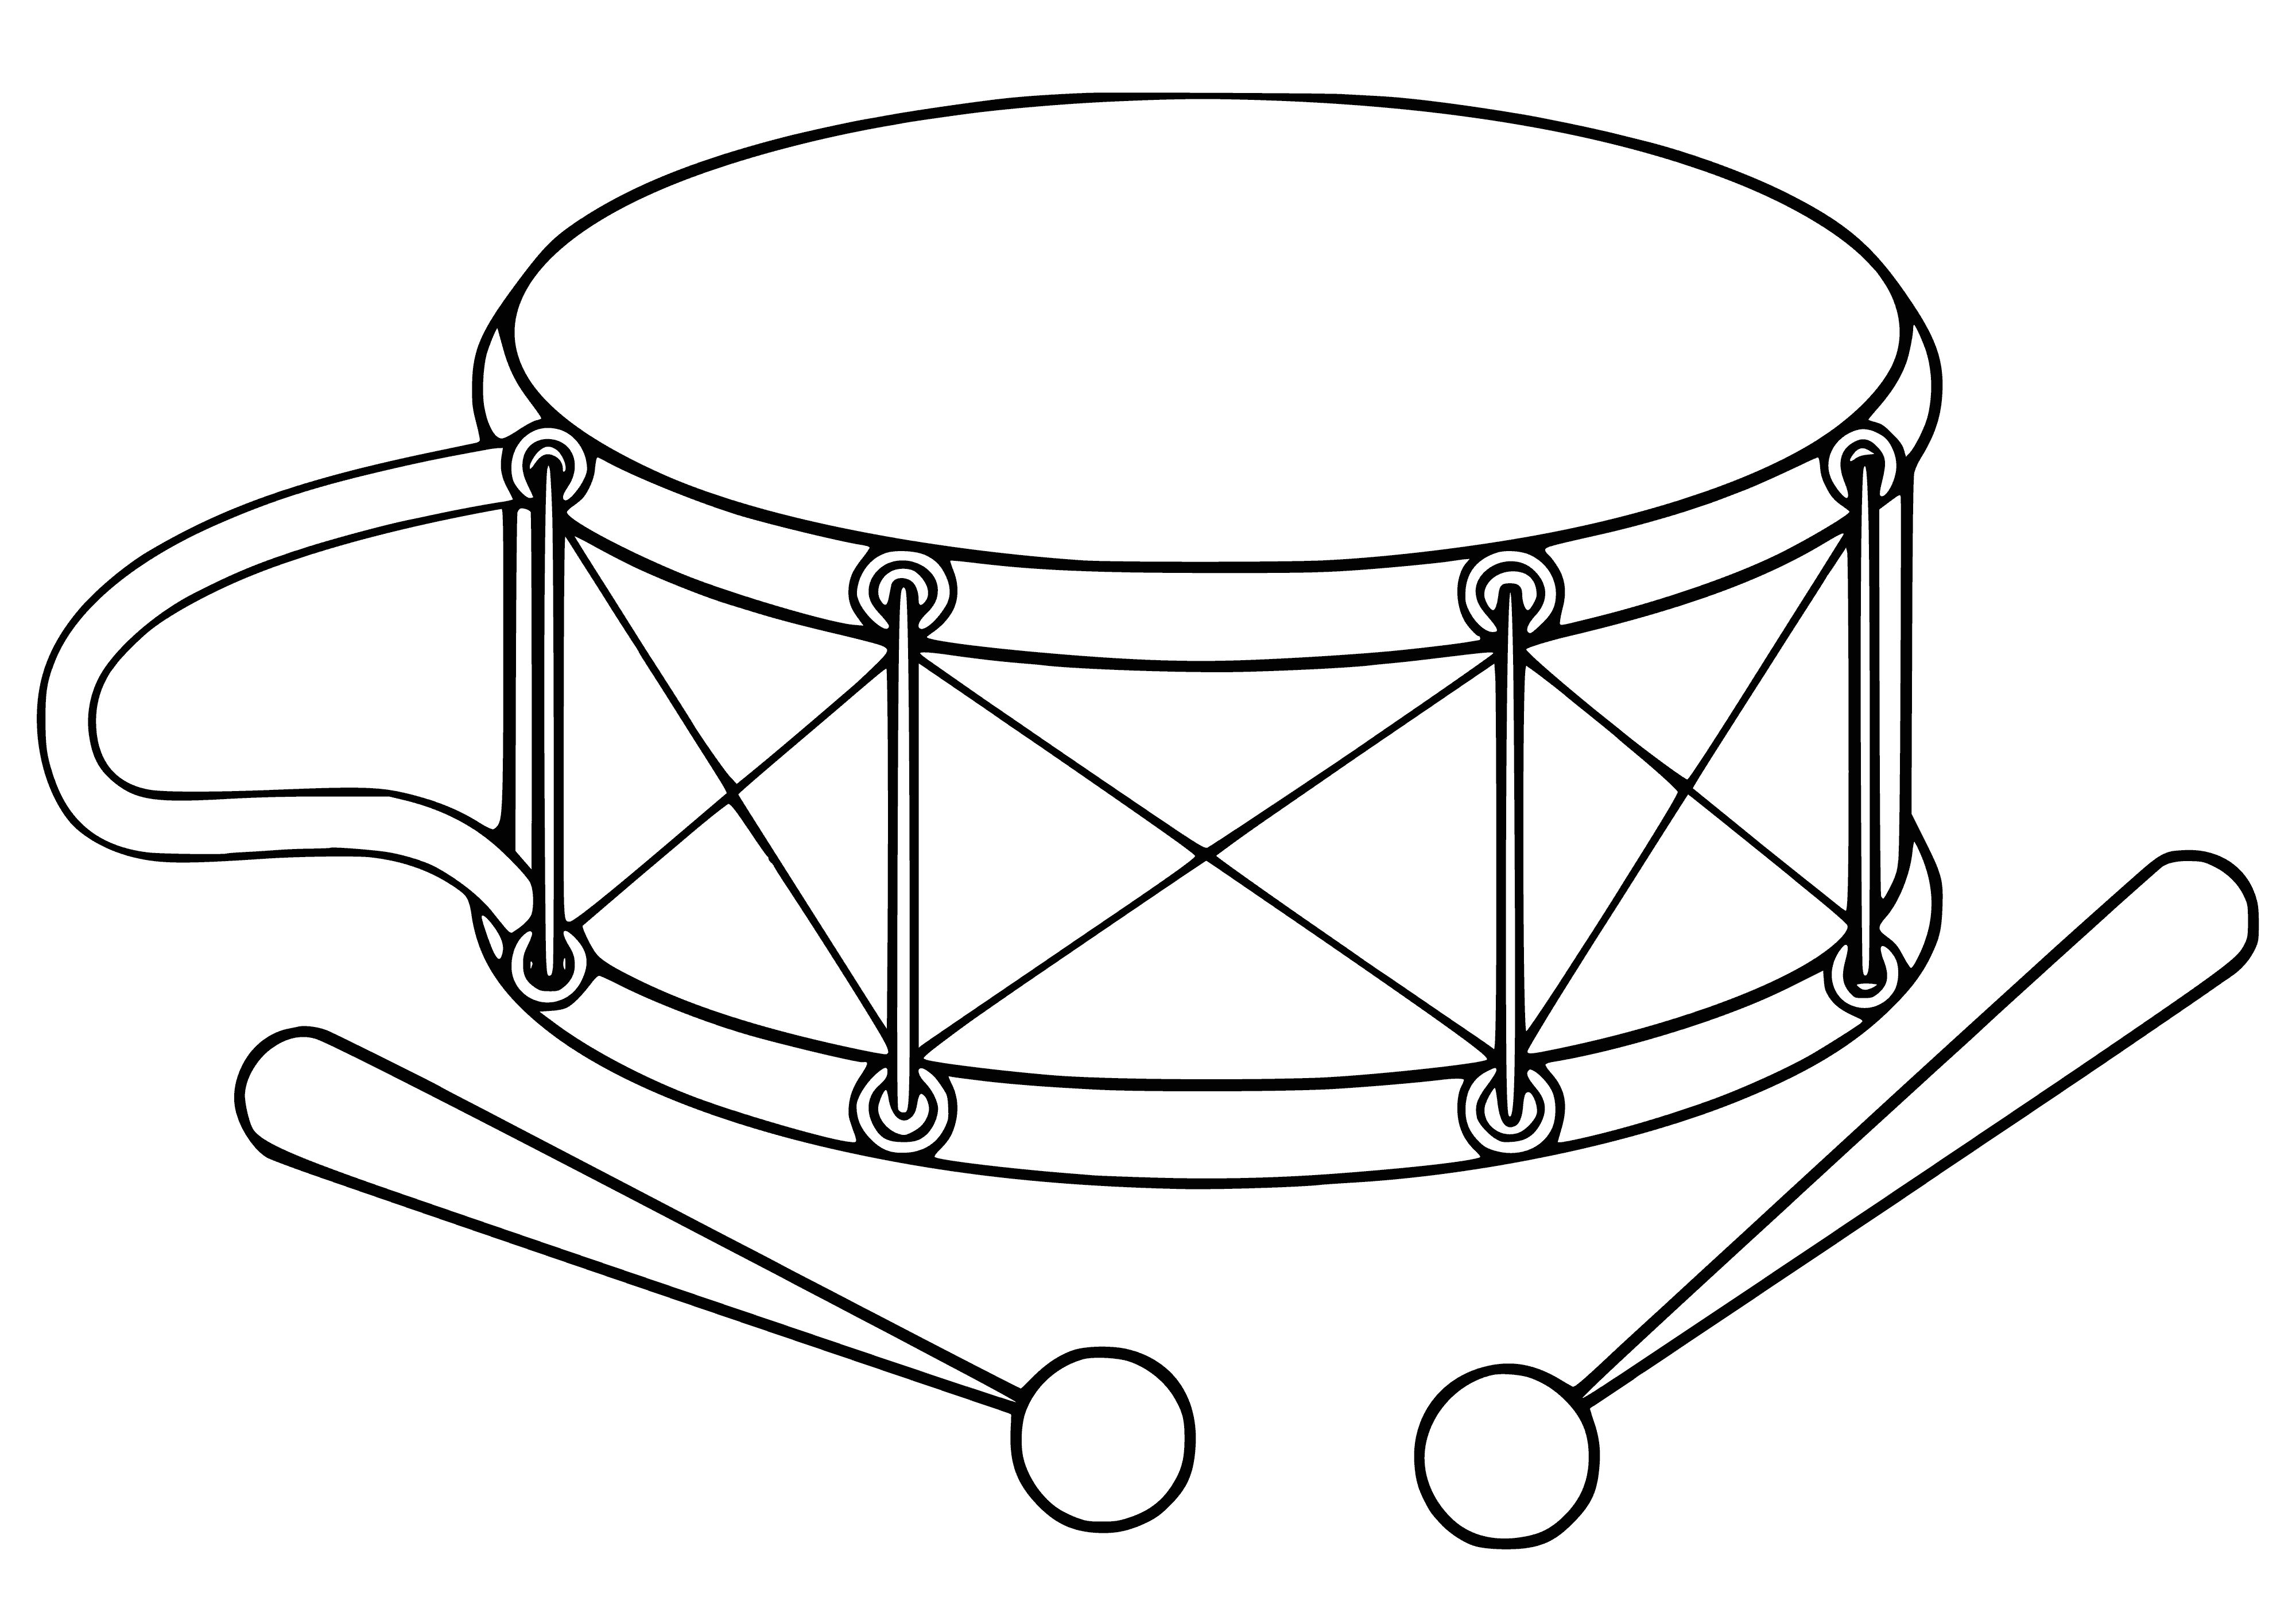 Drum coloring page